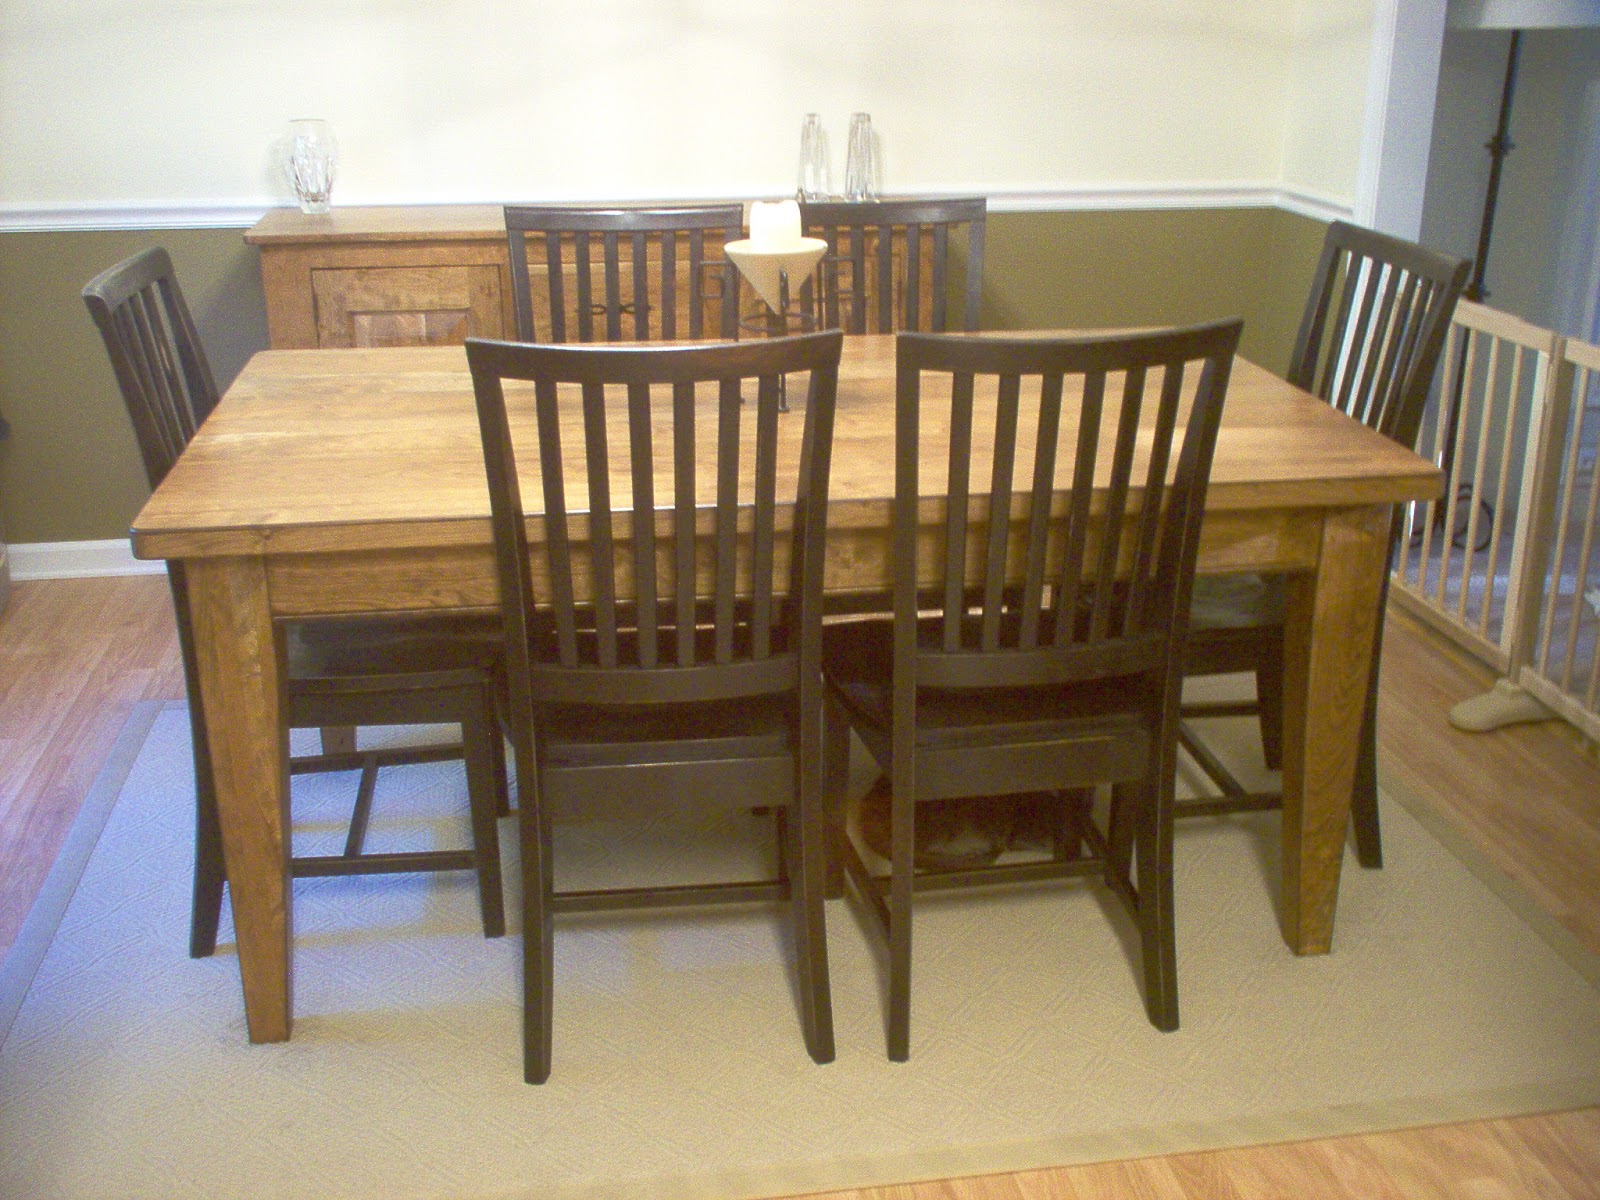 Standard Dining Tables, How Tall Should A Farm Table Be